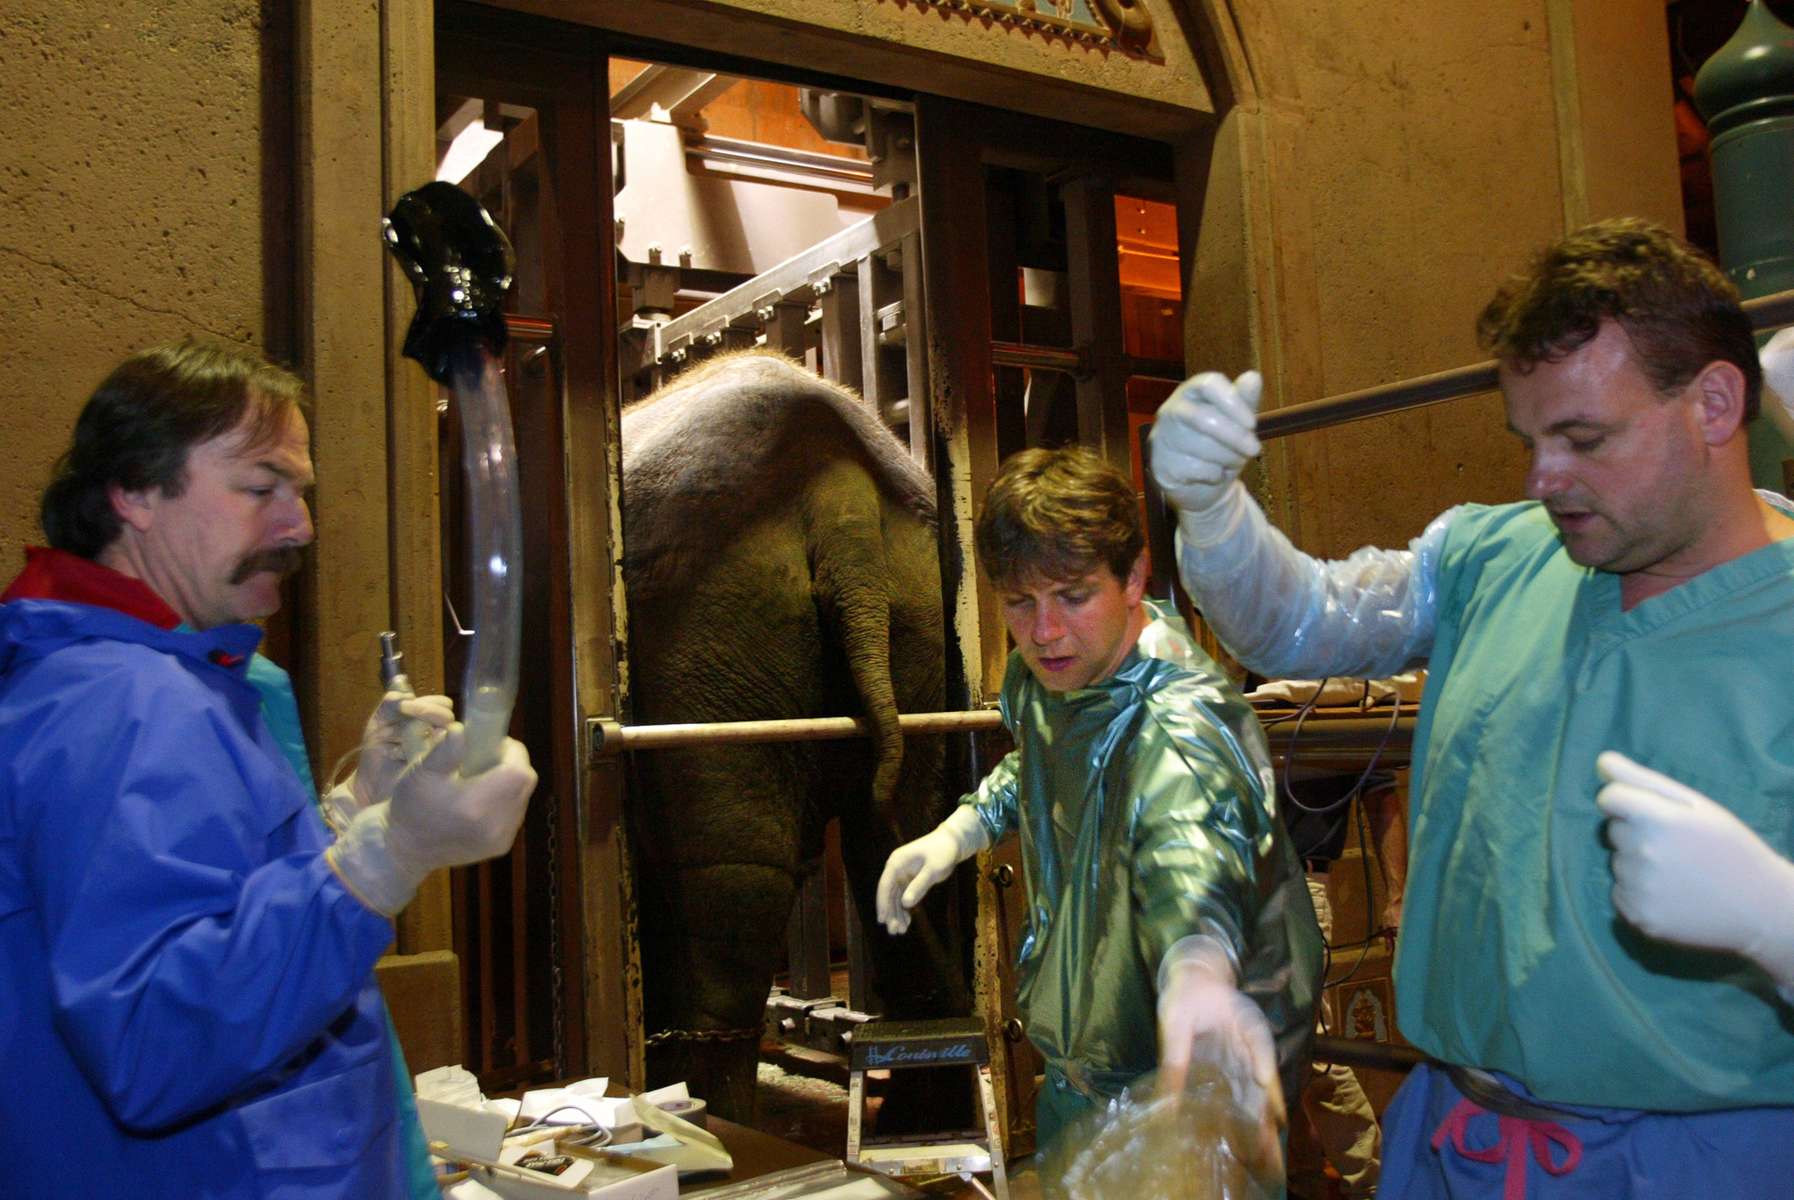 German scientists Thomas Hildebrandt (center), head of reproduction management at the Institute for Zoo and Wildlife Research and Frank Goeritz (right), Senior veternarian also from IZW, prepare to give Chai, an elephant, artificial insemination at the Woodland Park Zoo on February 28, 2005 in Seattle,WA. They were assisted by Pat Maluy, the lead elephant keeper at the Woodland Park Zoo, who is holding the endoscope used to visualize the elephant's passageway. The elephant, whose legs are chained, continues to be artificially inseminated every month to this day.